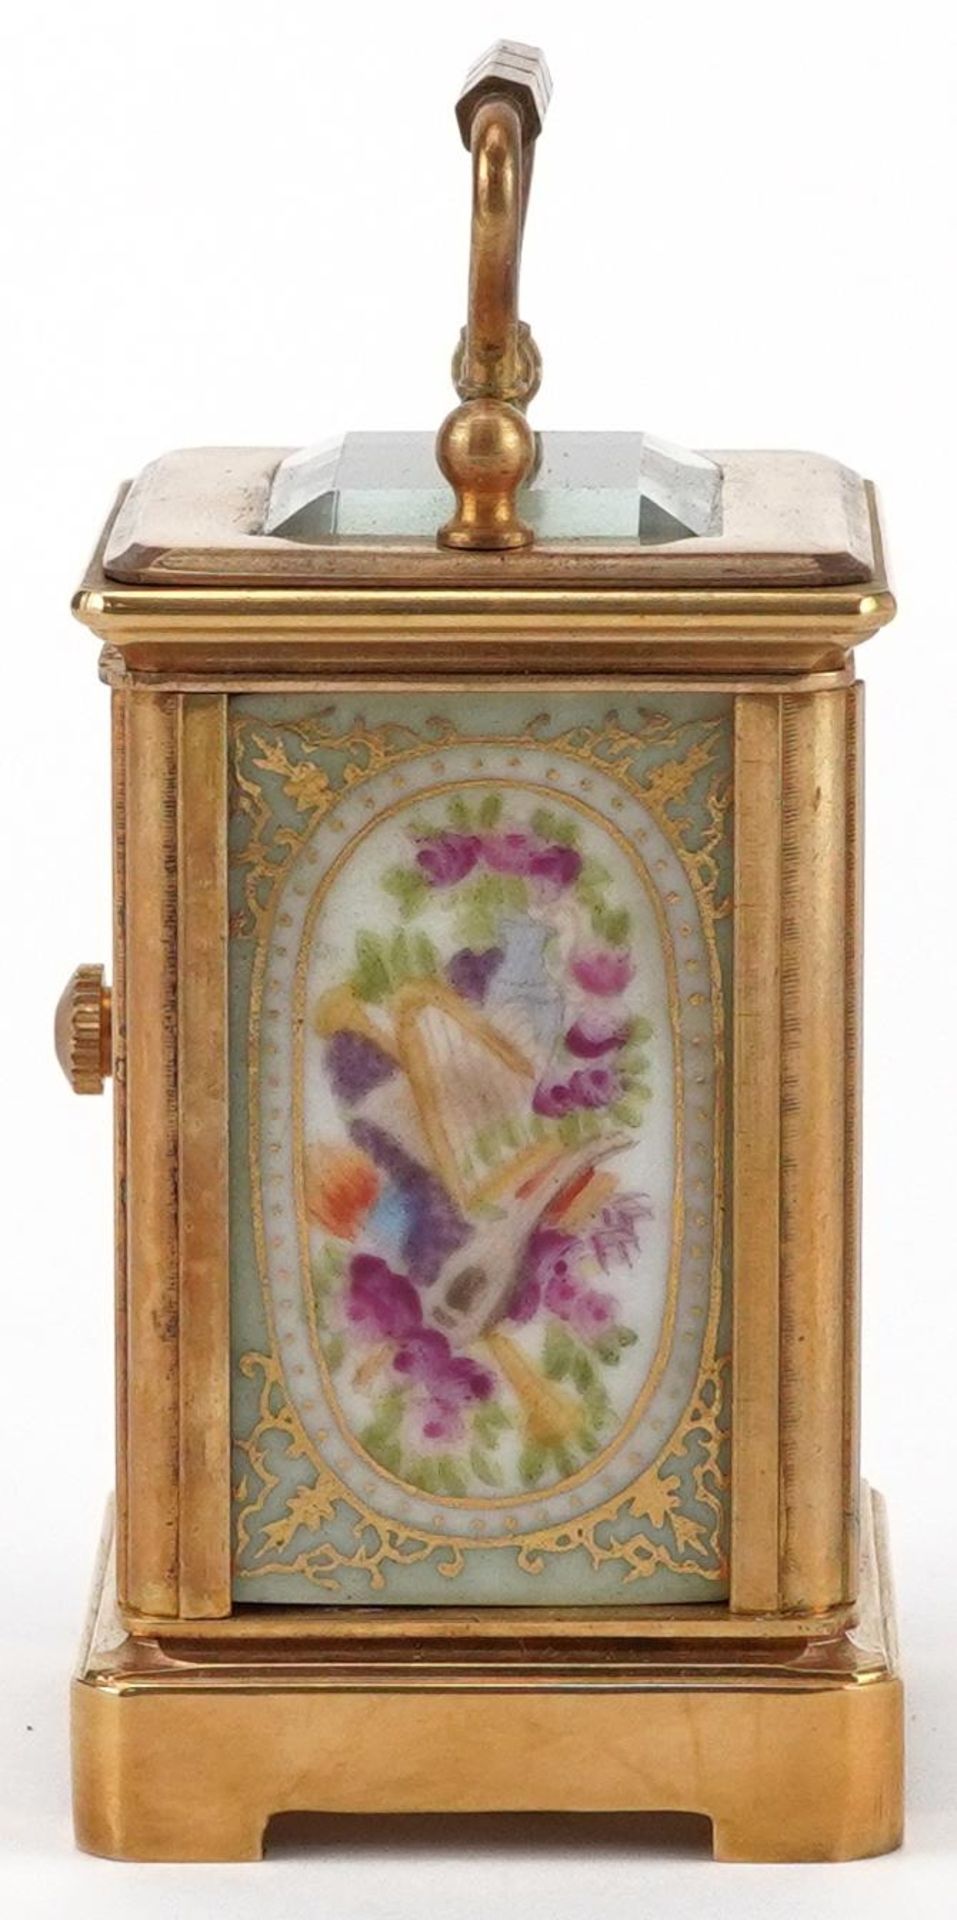 Miniature brass cased carriage clock with Sevres type porcelain panels depicting flowers, 5.5cm high - Image 4 of 8